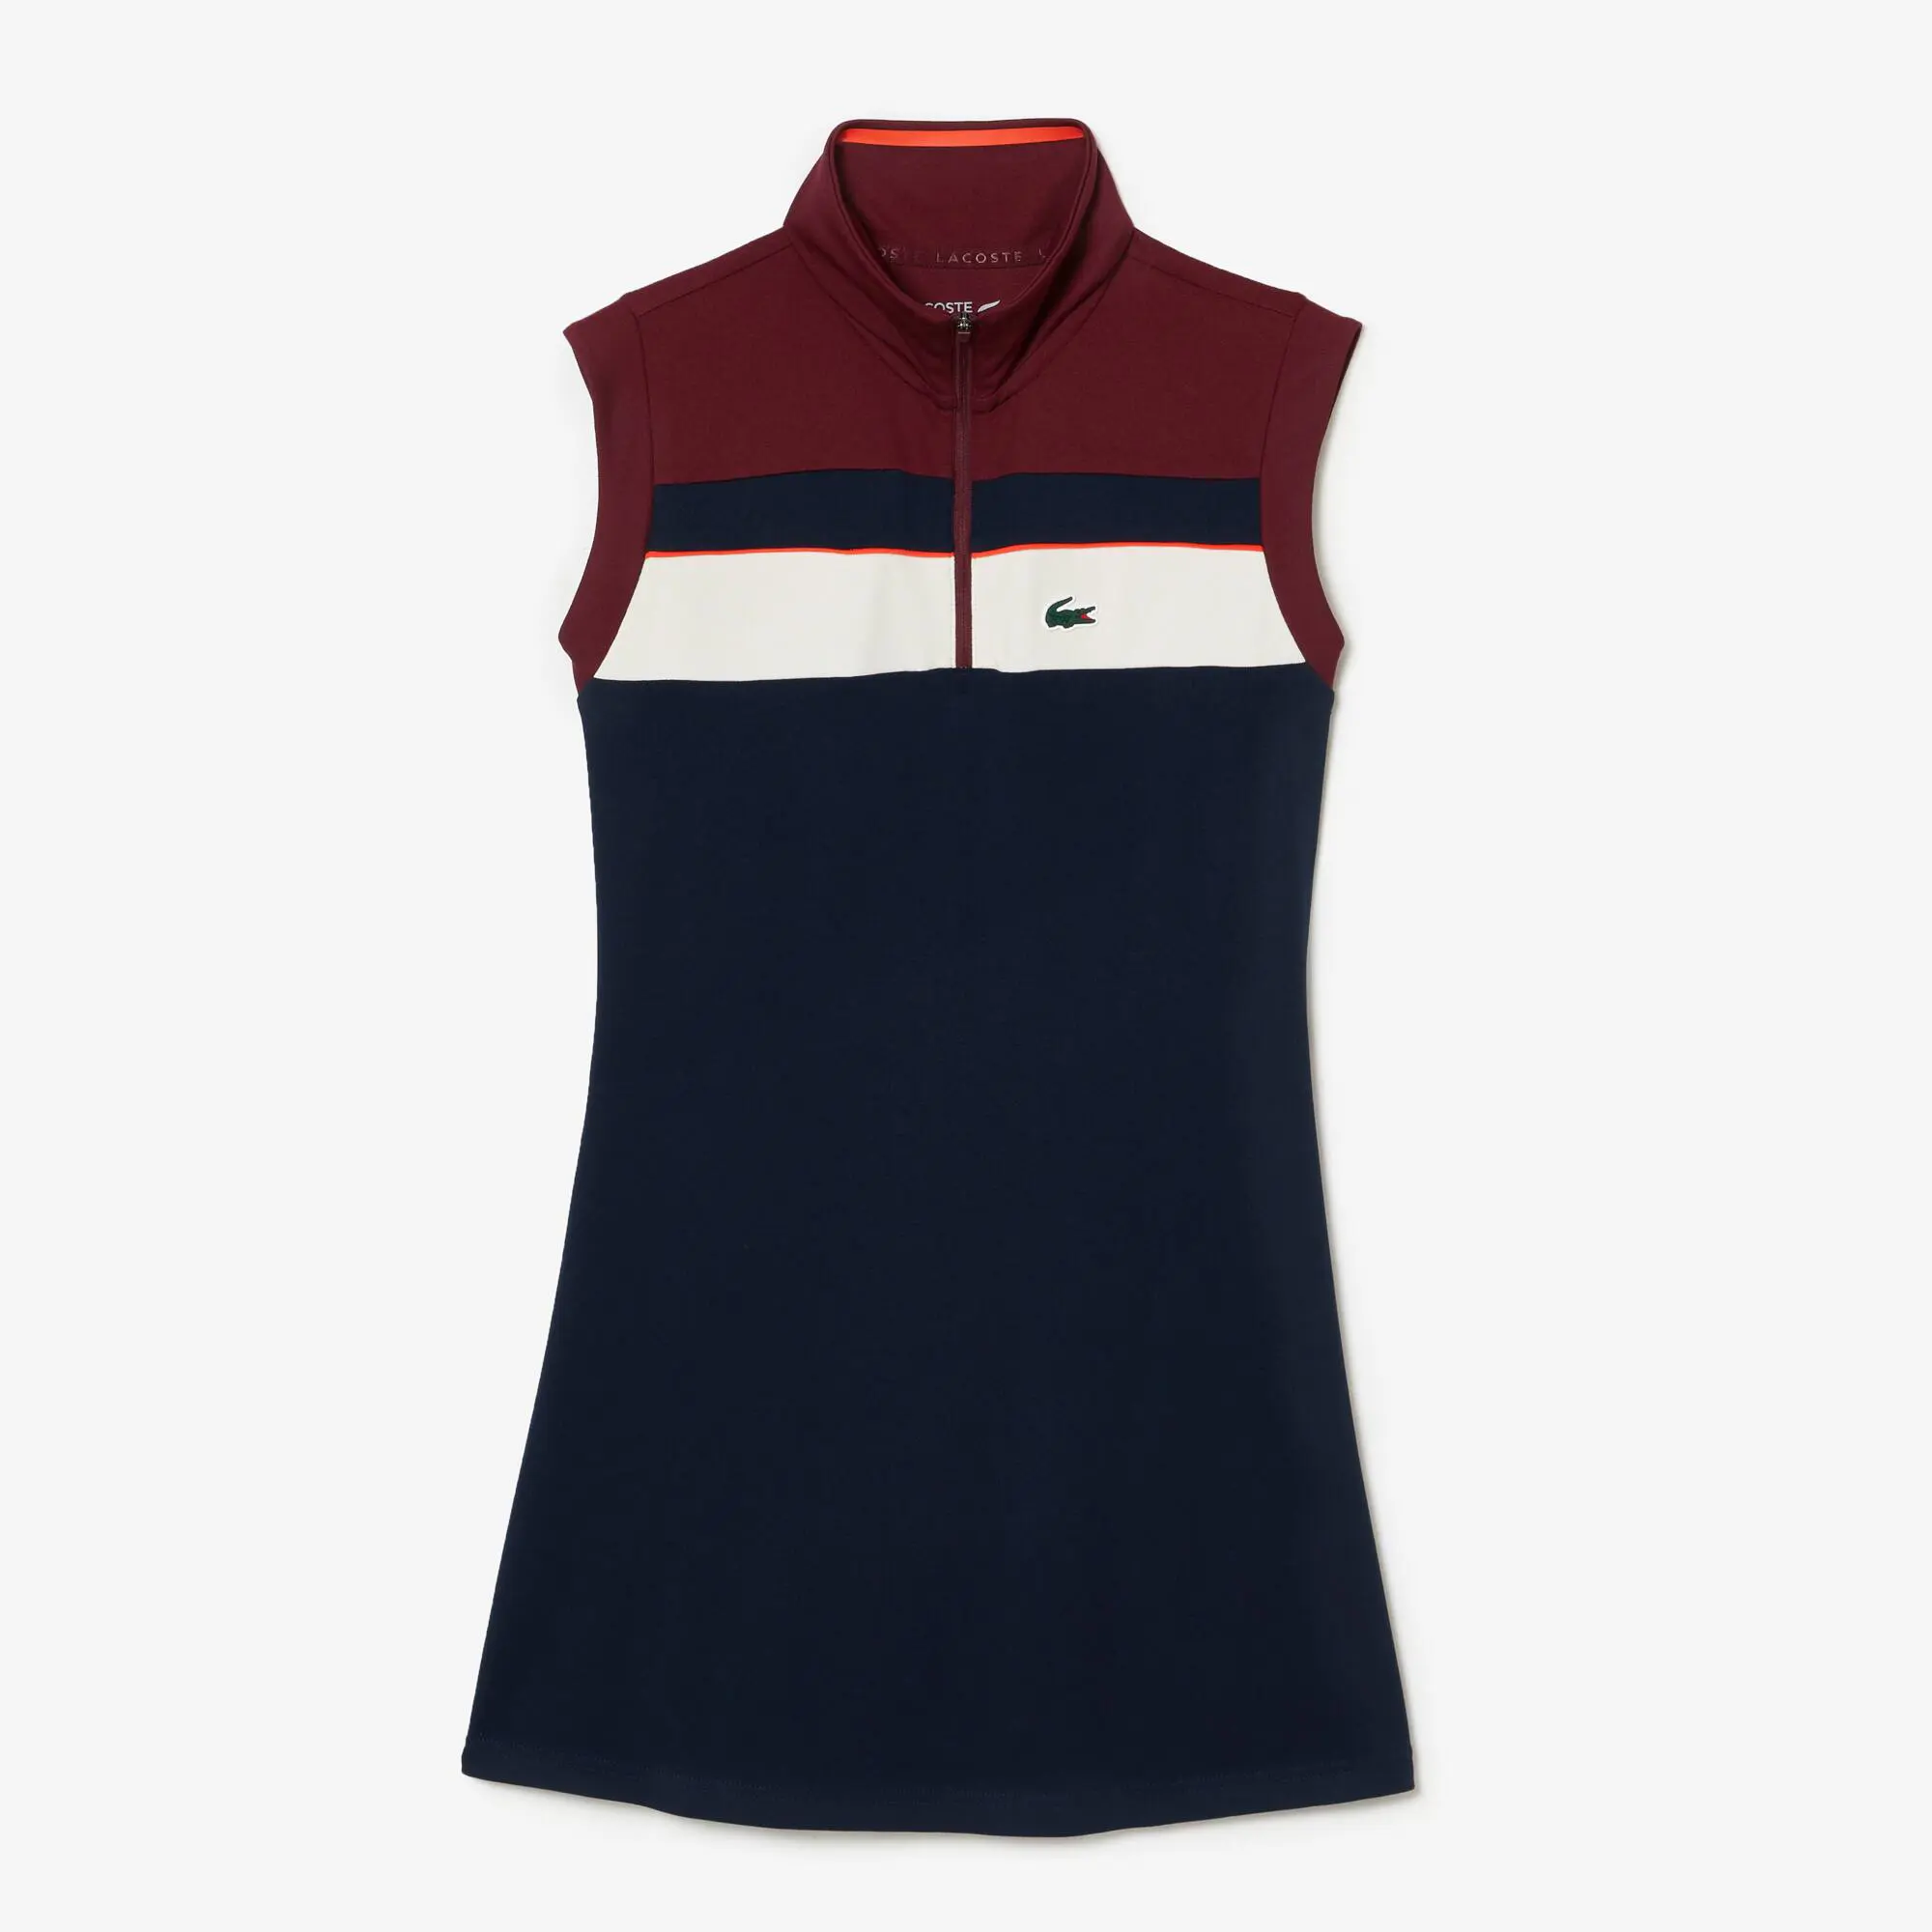 Lacoste Recycled Fiber Tennis Dress with Integrated Shorts. 1